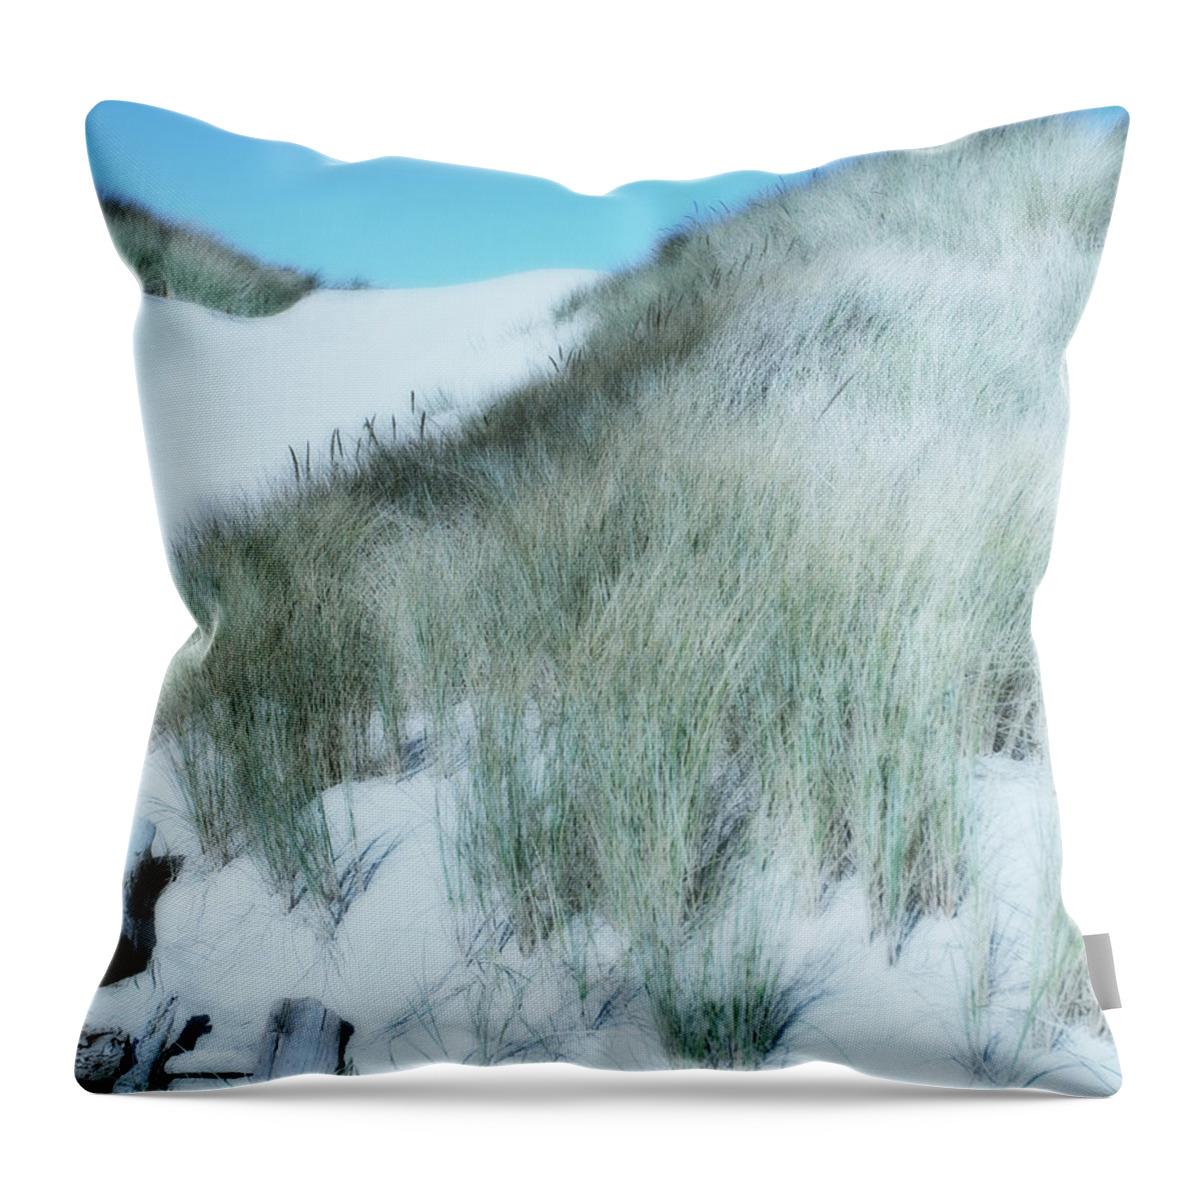 Sand Dune Throw Pillow featuring the photograph Dune by Bonnie Bruno